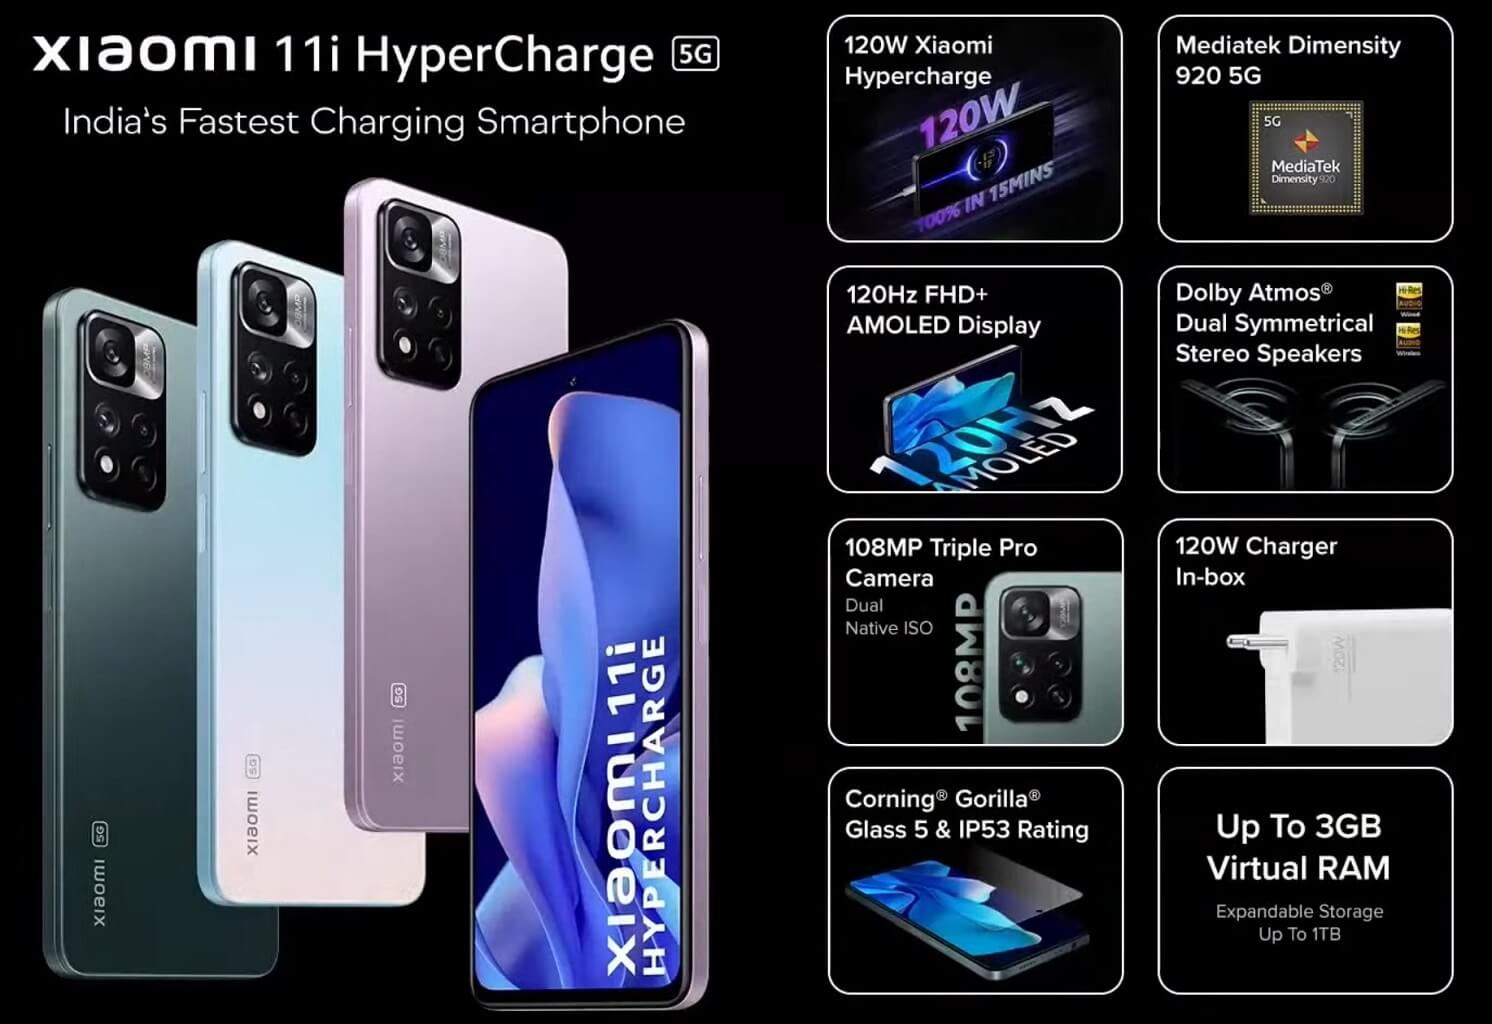 Xiaomi 11i HyperCharger features